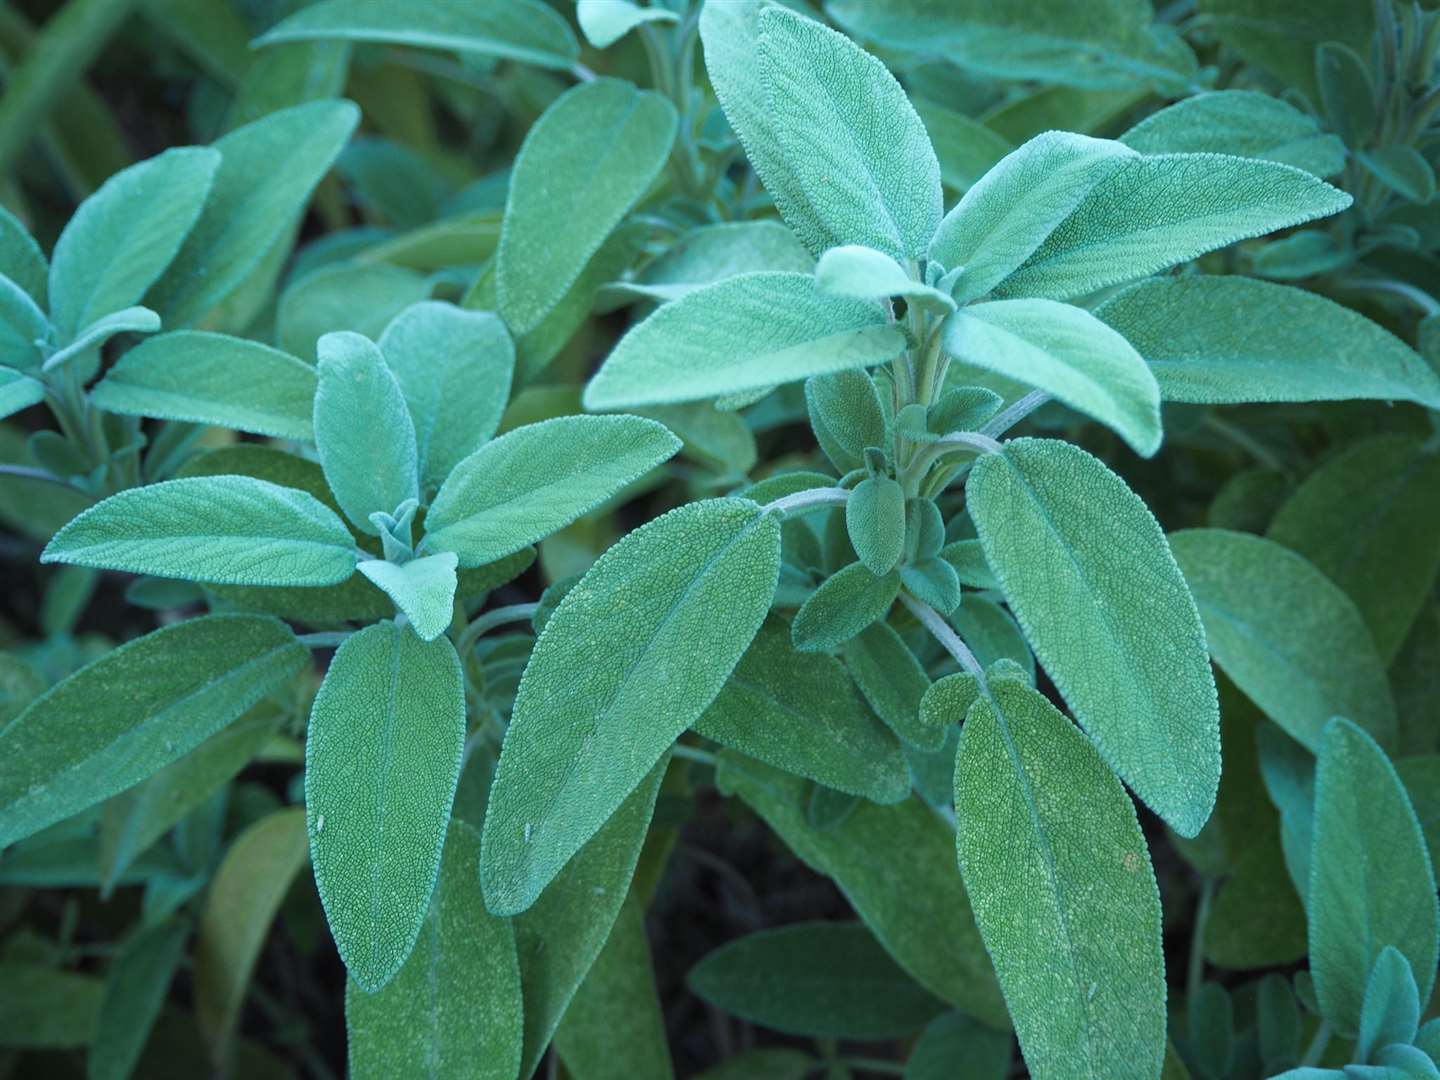 Sage is well known for its culinary and medicinal uses.